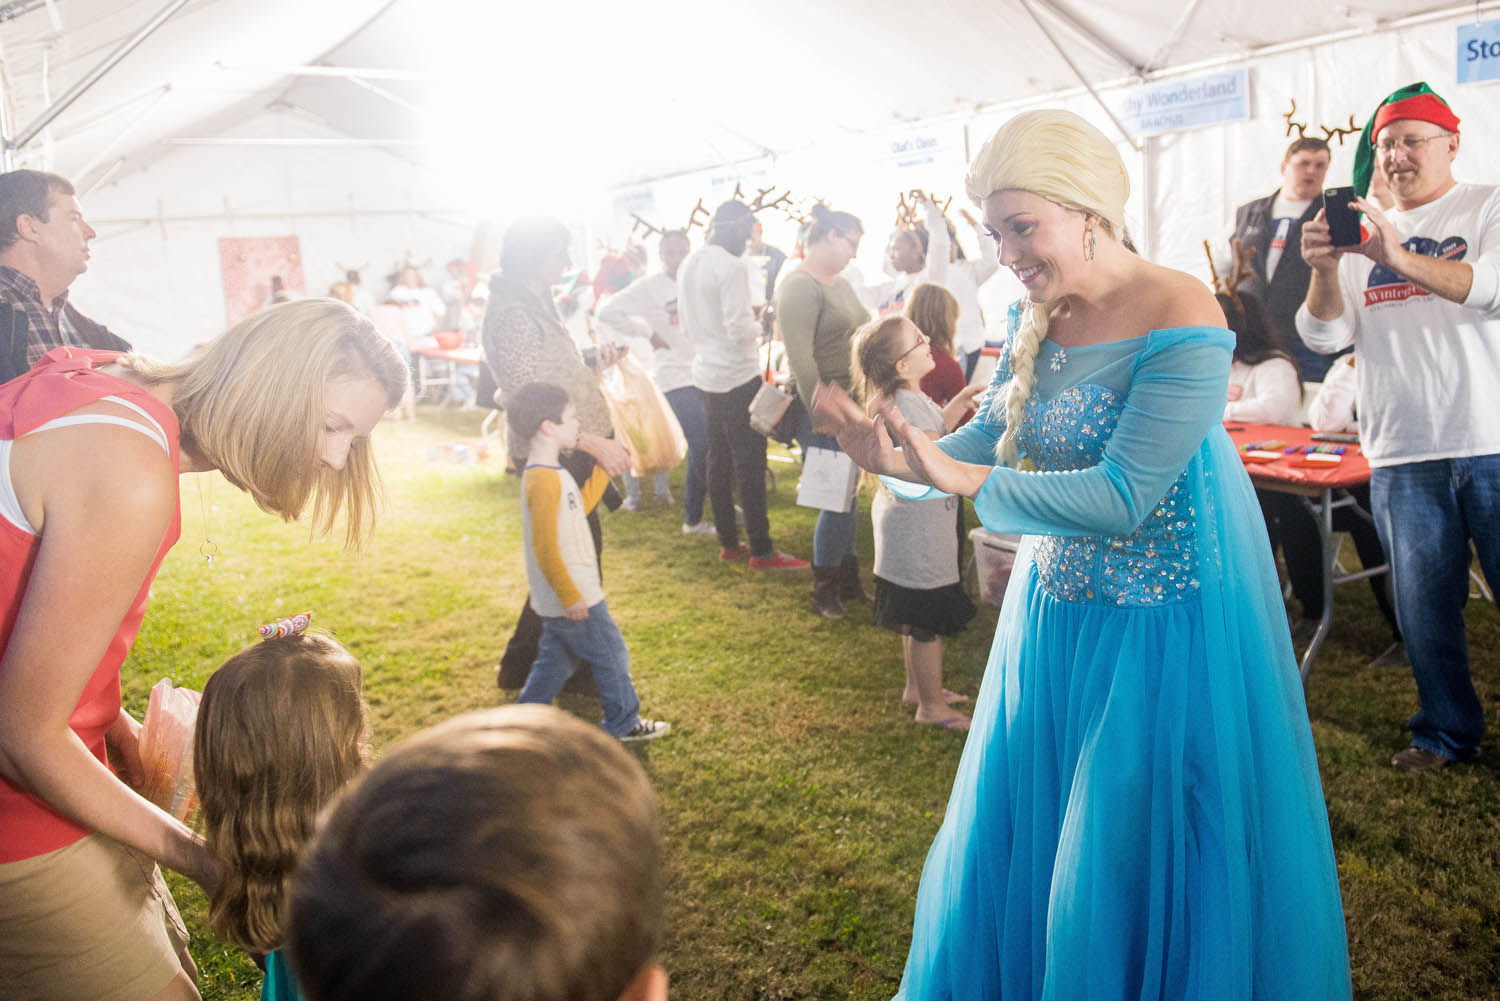 a woman in a blue dress waving at children